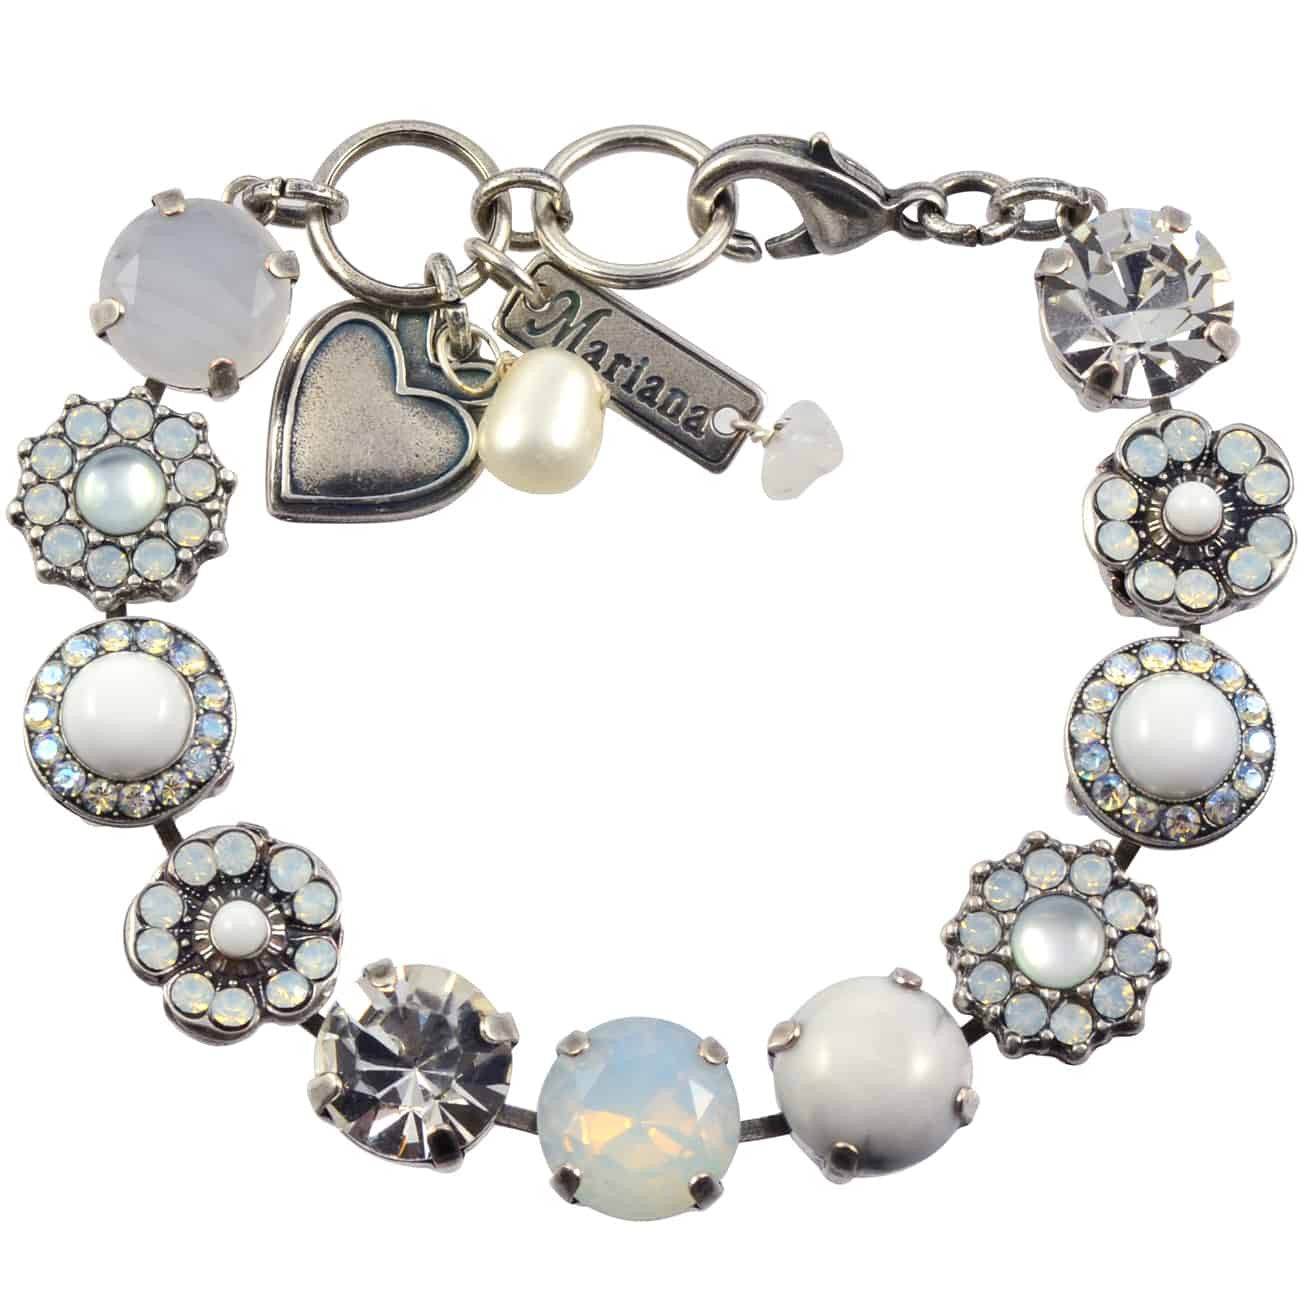 Mariana Jewelry Forever Silver Plated Flower crystal Tennis Bracelet, 8